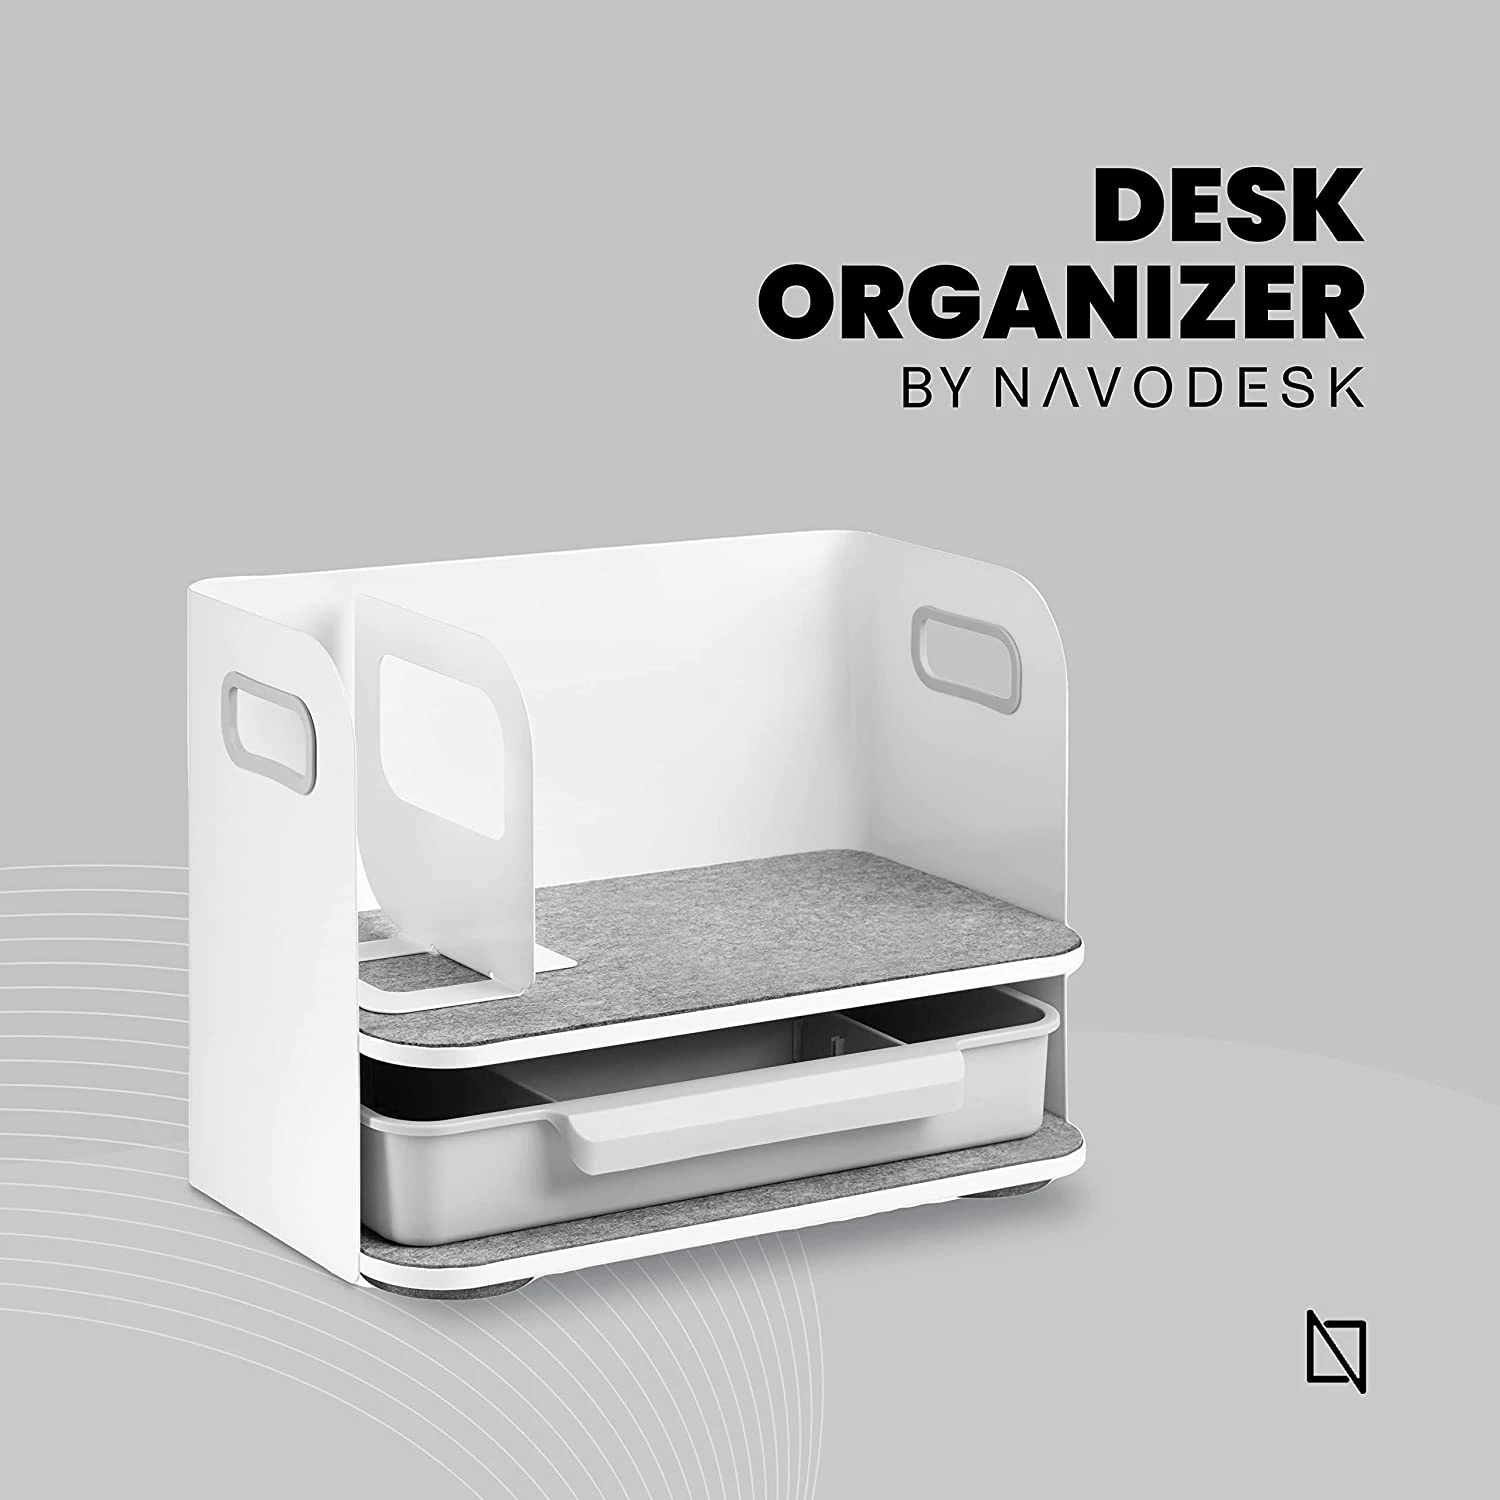 Navodesk Desk Organizer - Compact Solution with Drawer and Bookend for a Clutter-Free Workspace